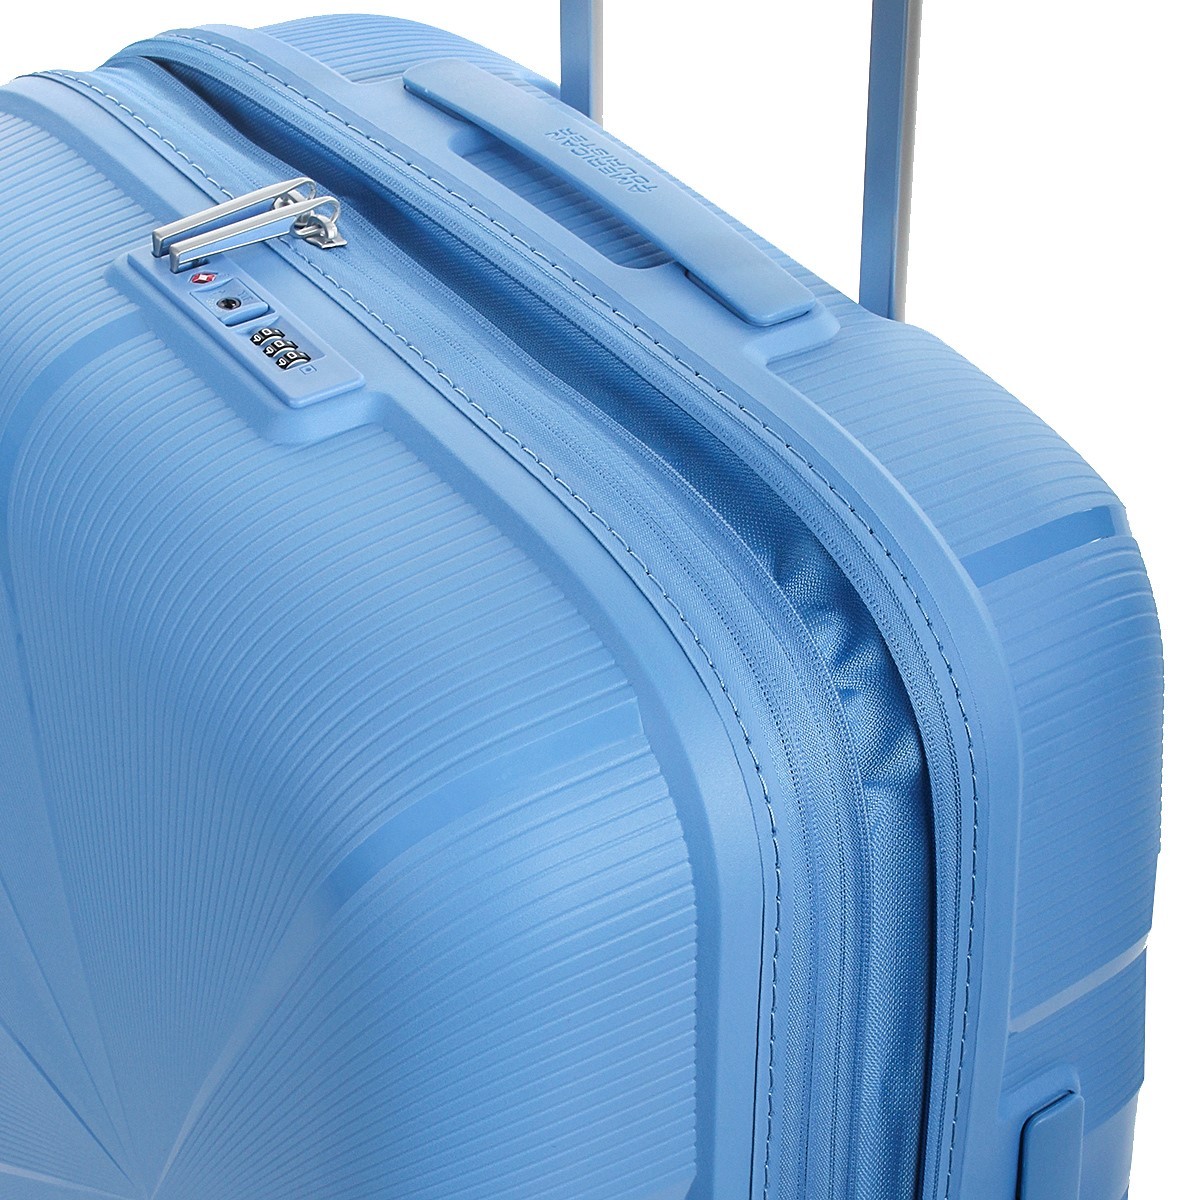 American tourister by samsonite Spinner m 4 ruote Tranquil blue Starvibe MD5*01003